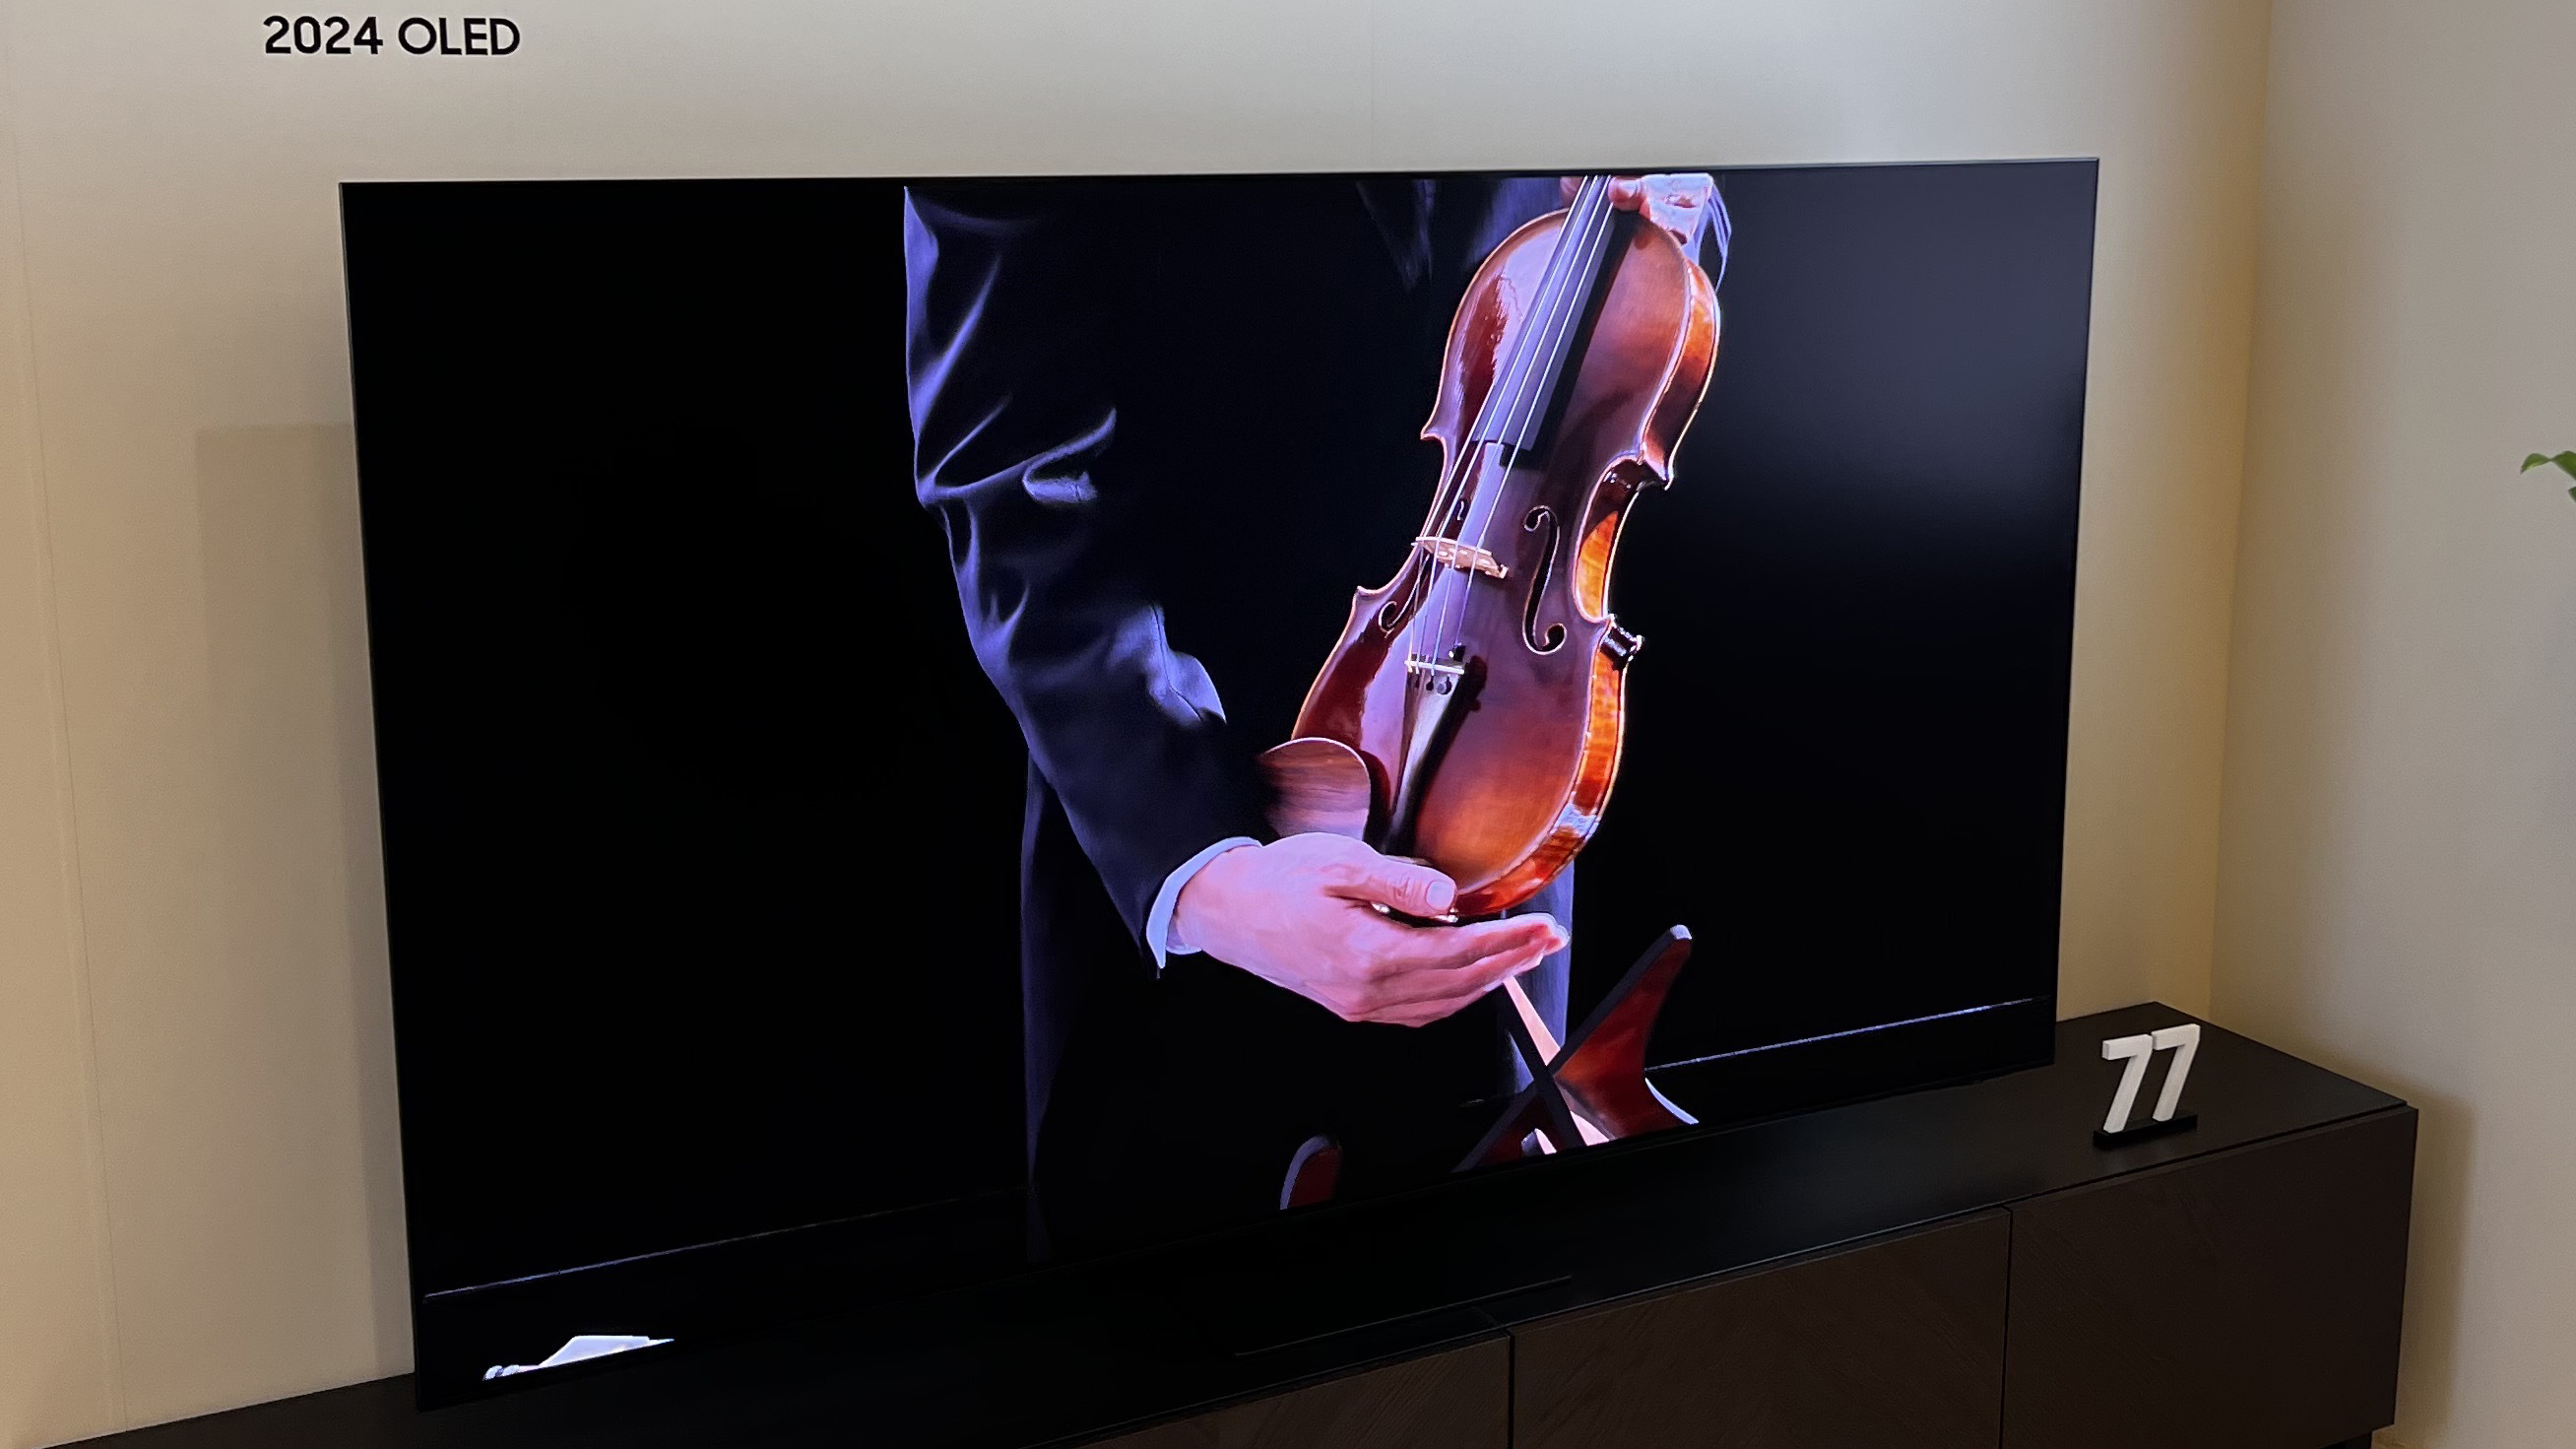 The Samsung S95D at CES 2024 displaying a person holding a violin.